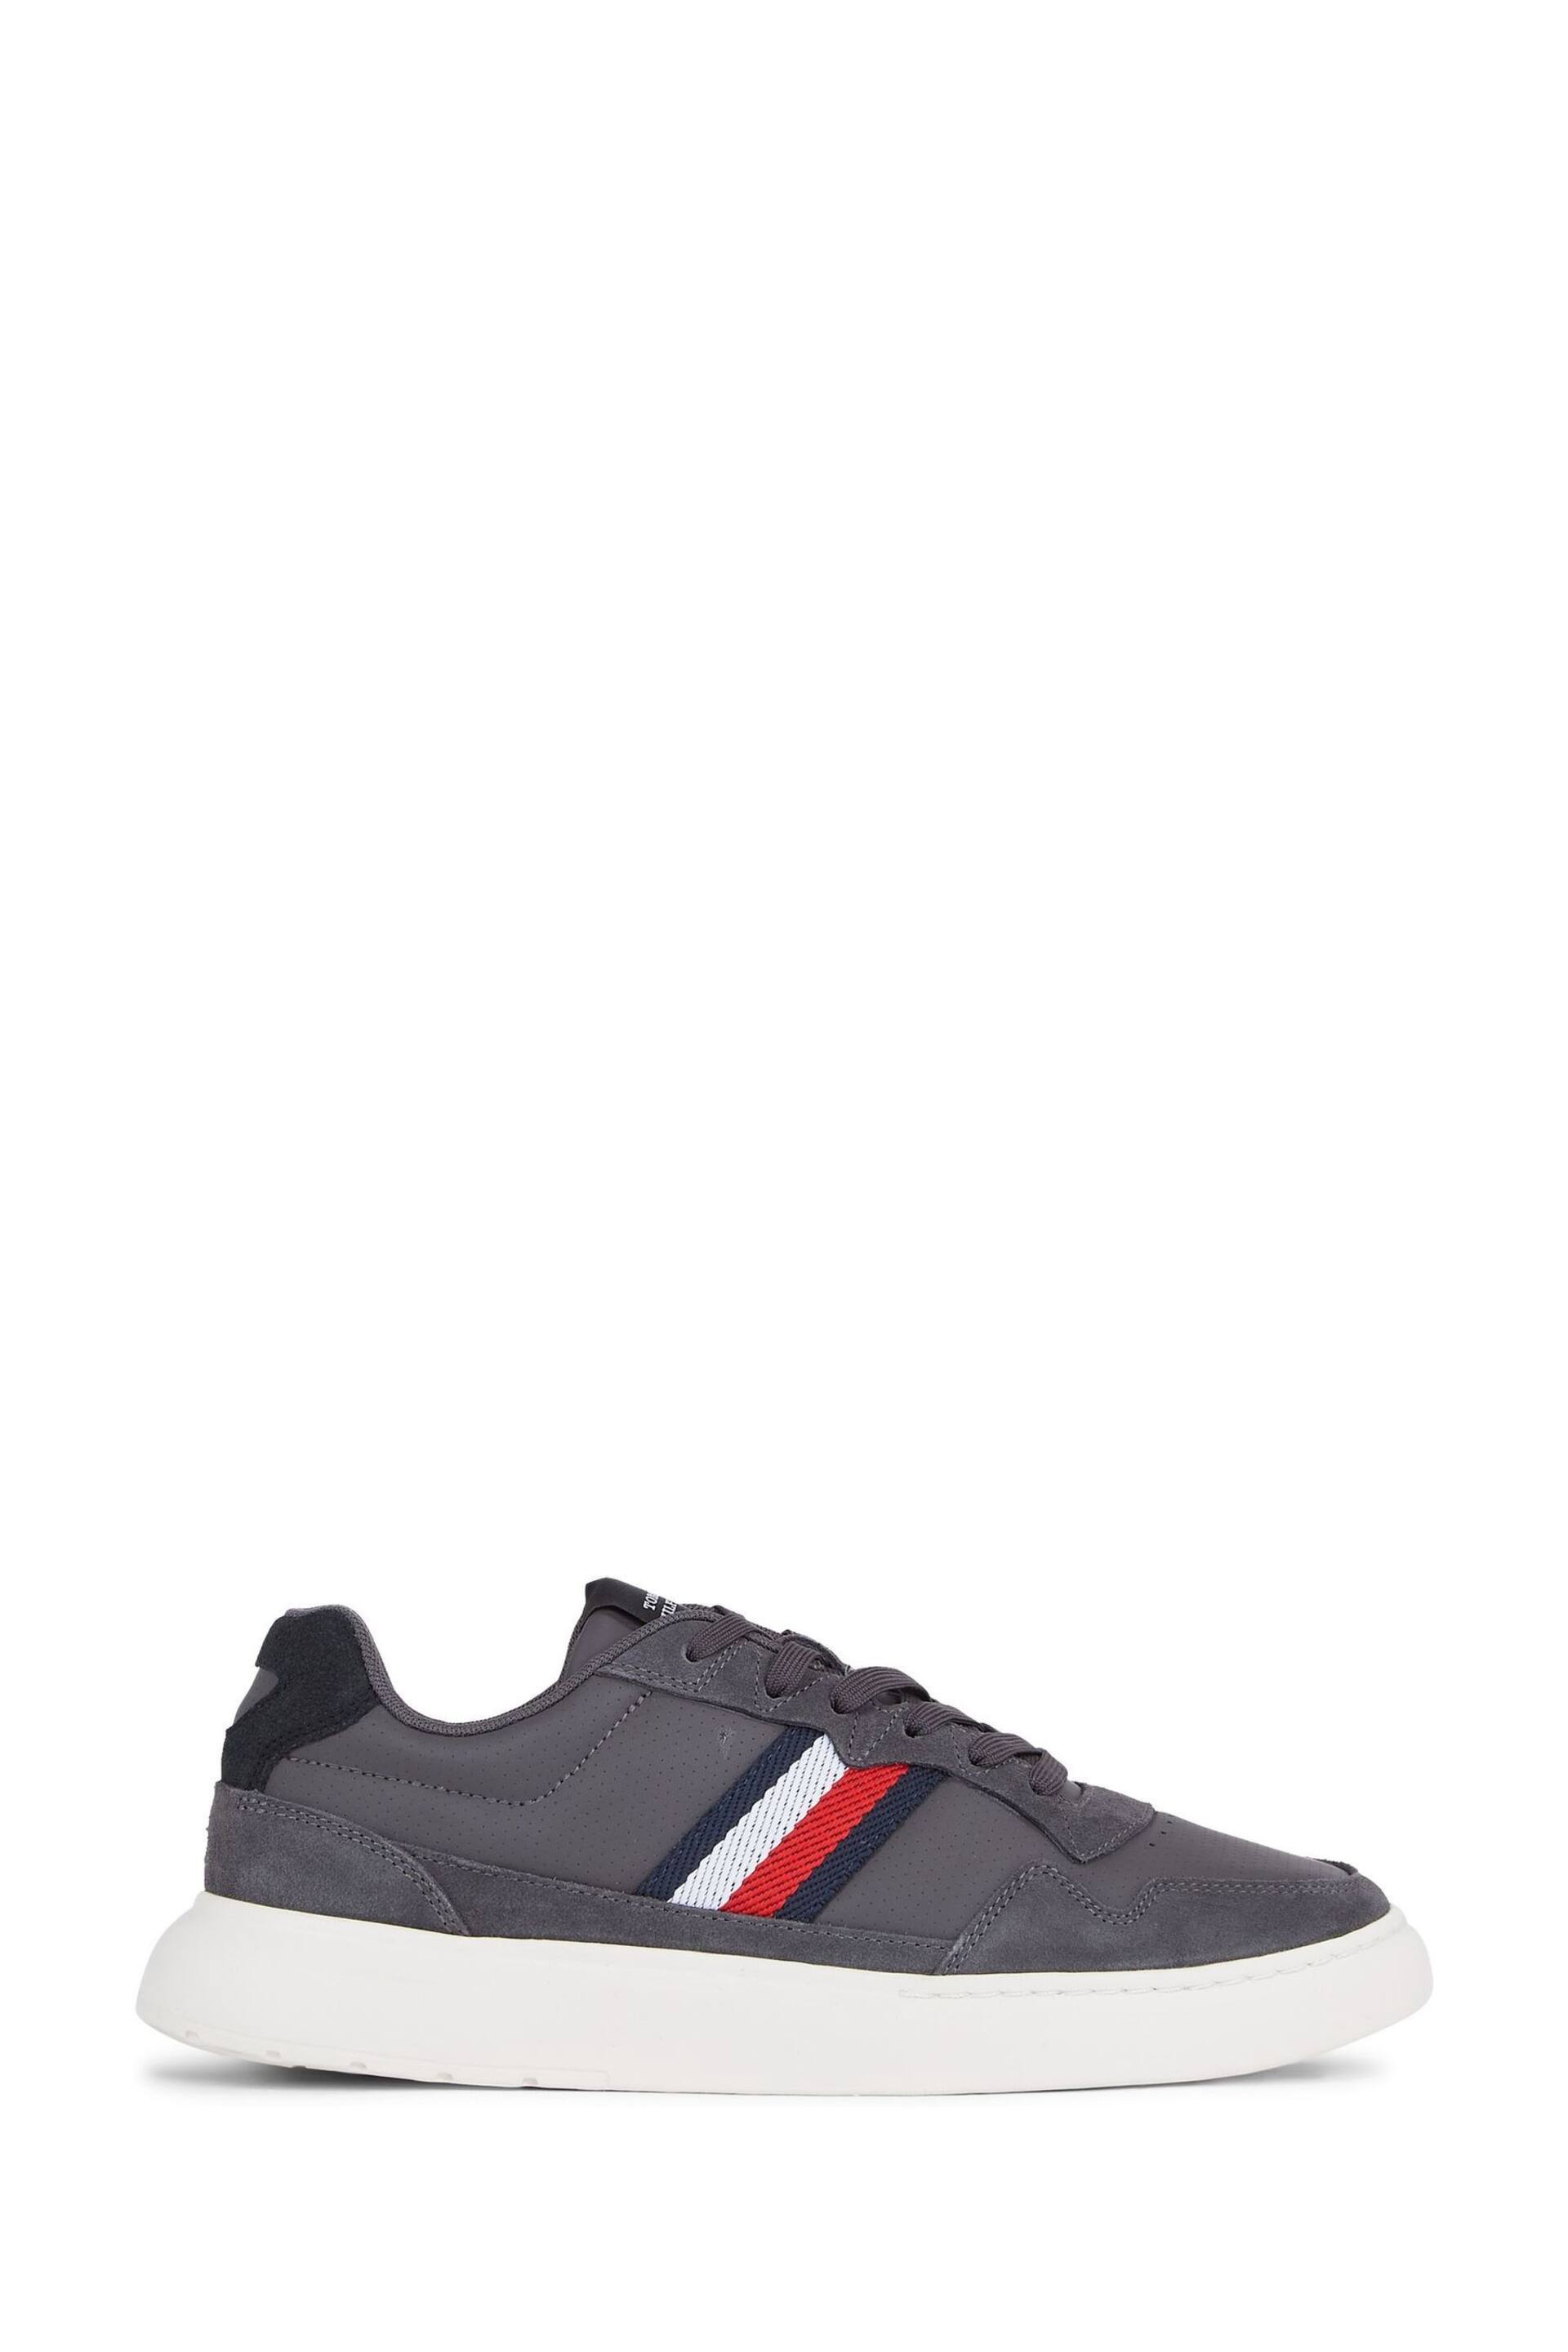 Tommy Hilfiger Silver Mix Stripes Sneakers - Image 3 of 5